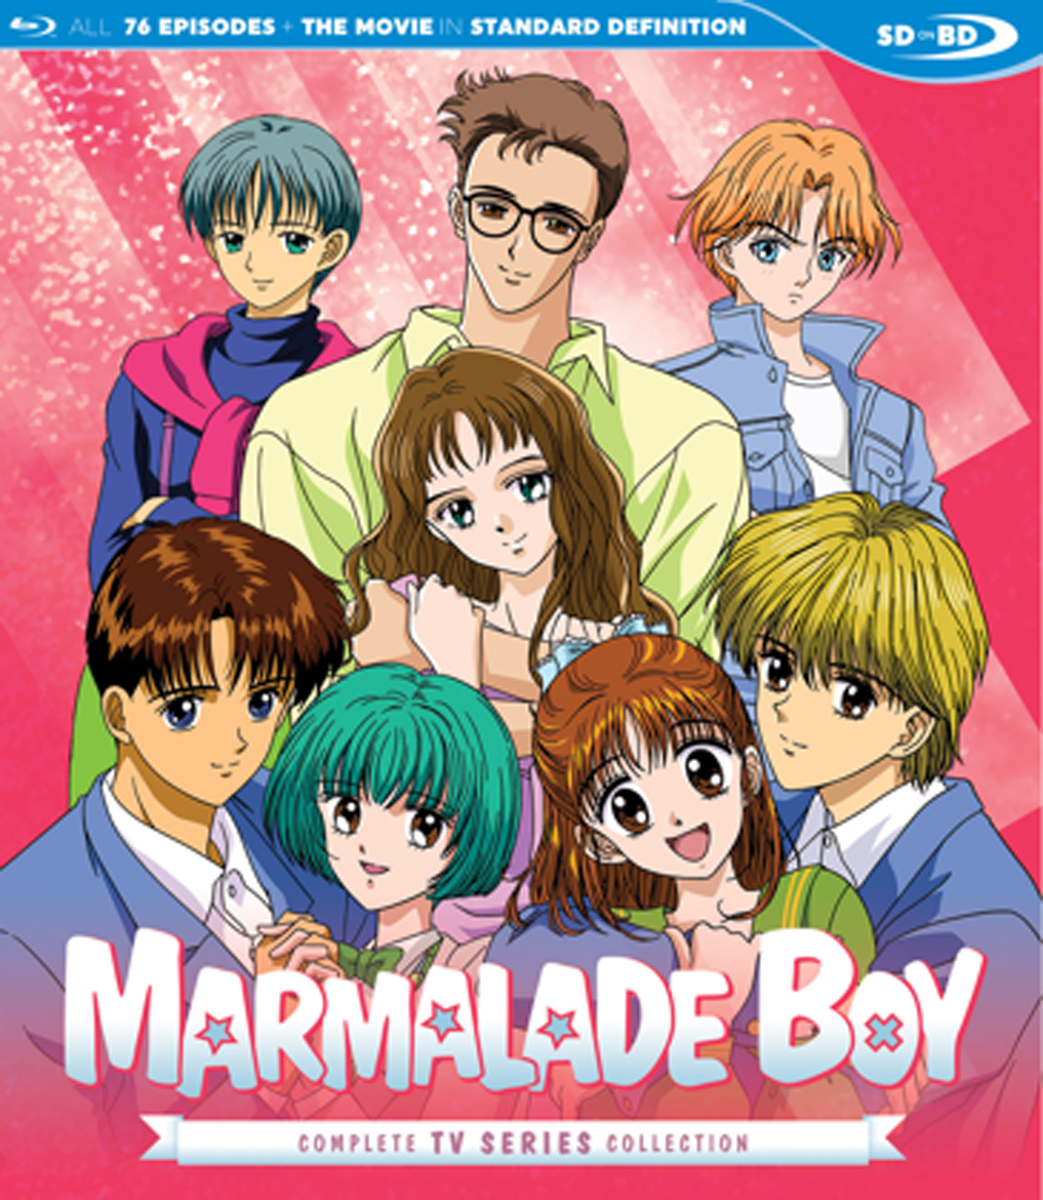 New * Marmalade Boy Complete TV Series Collection Blu-Ray * Sealed * SD on  BD 875707177092